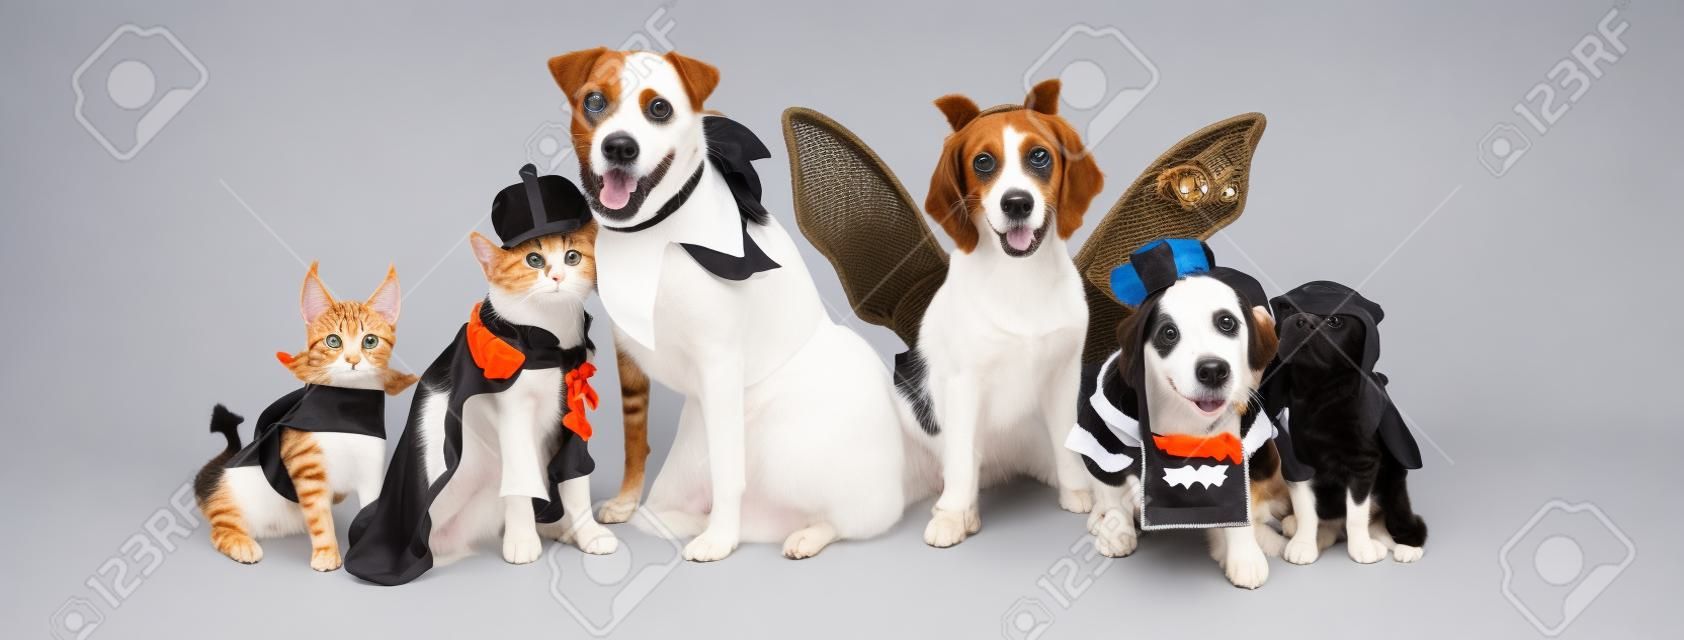 Row of dogs and cats together wearing cute Halloween costumes. Web banner or social media header on white.